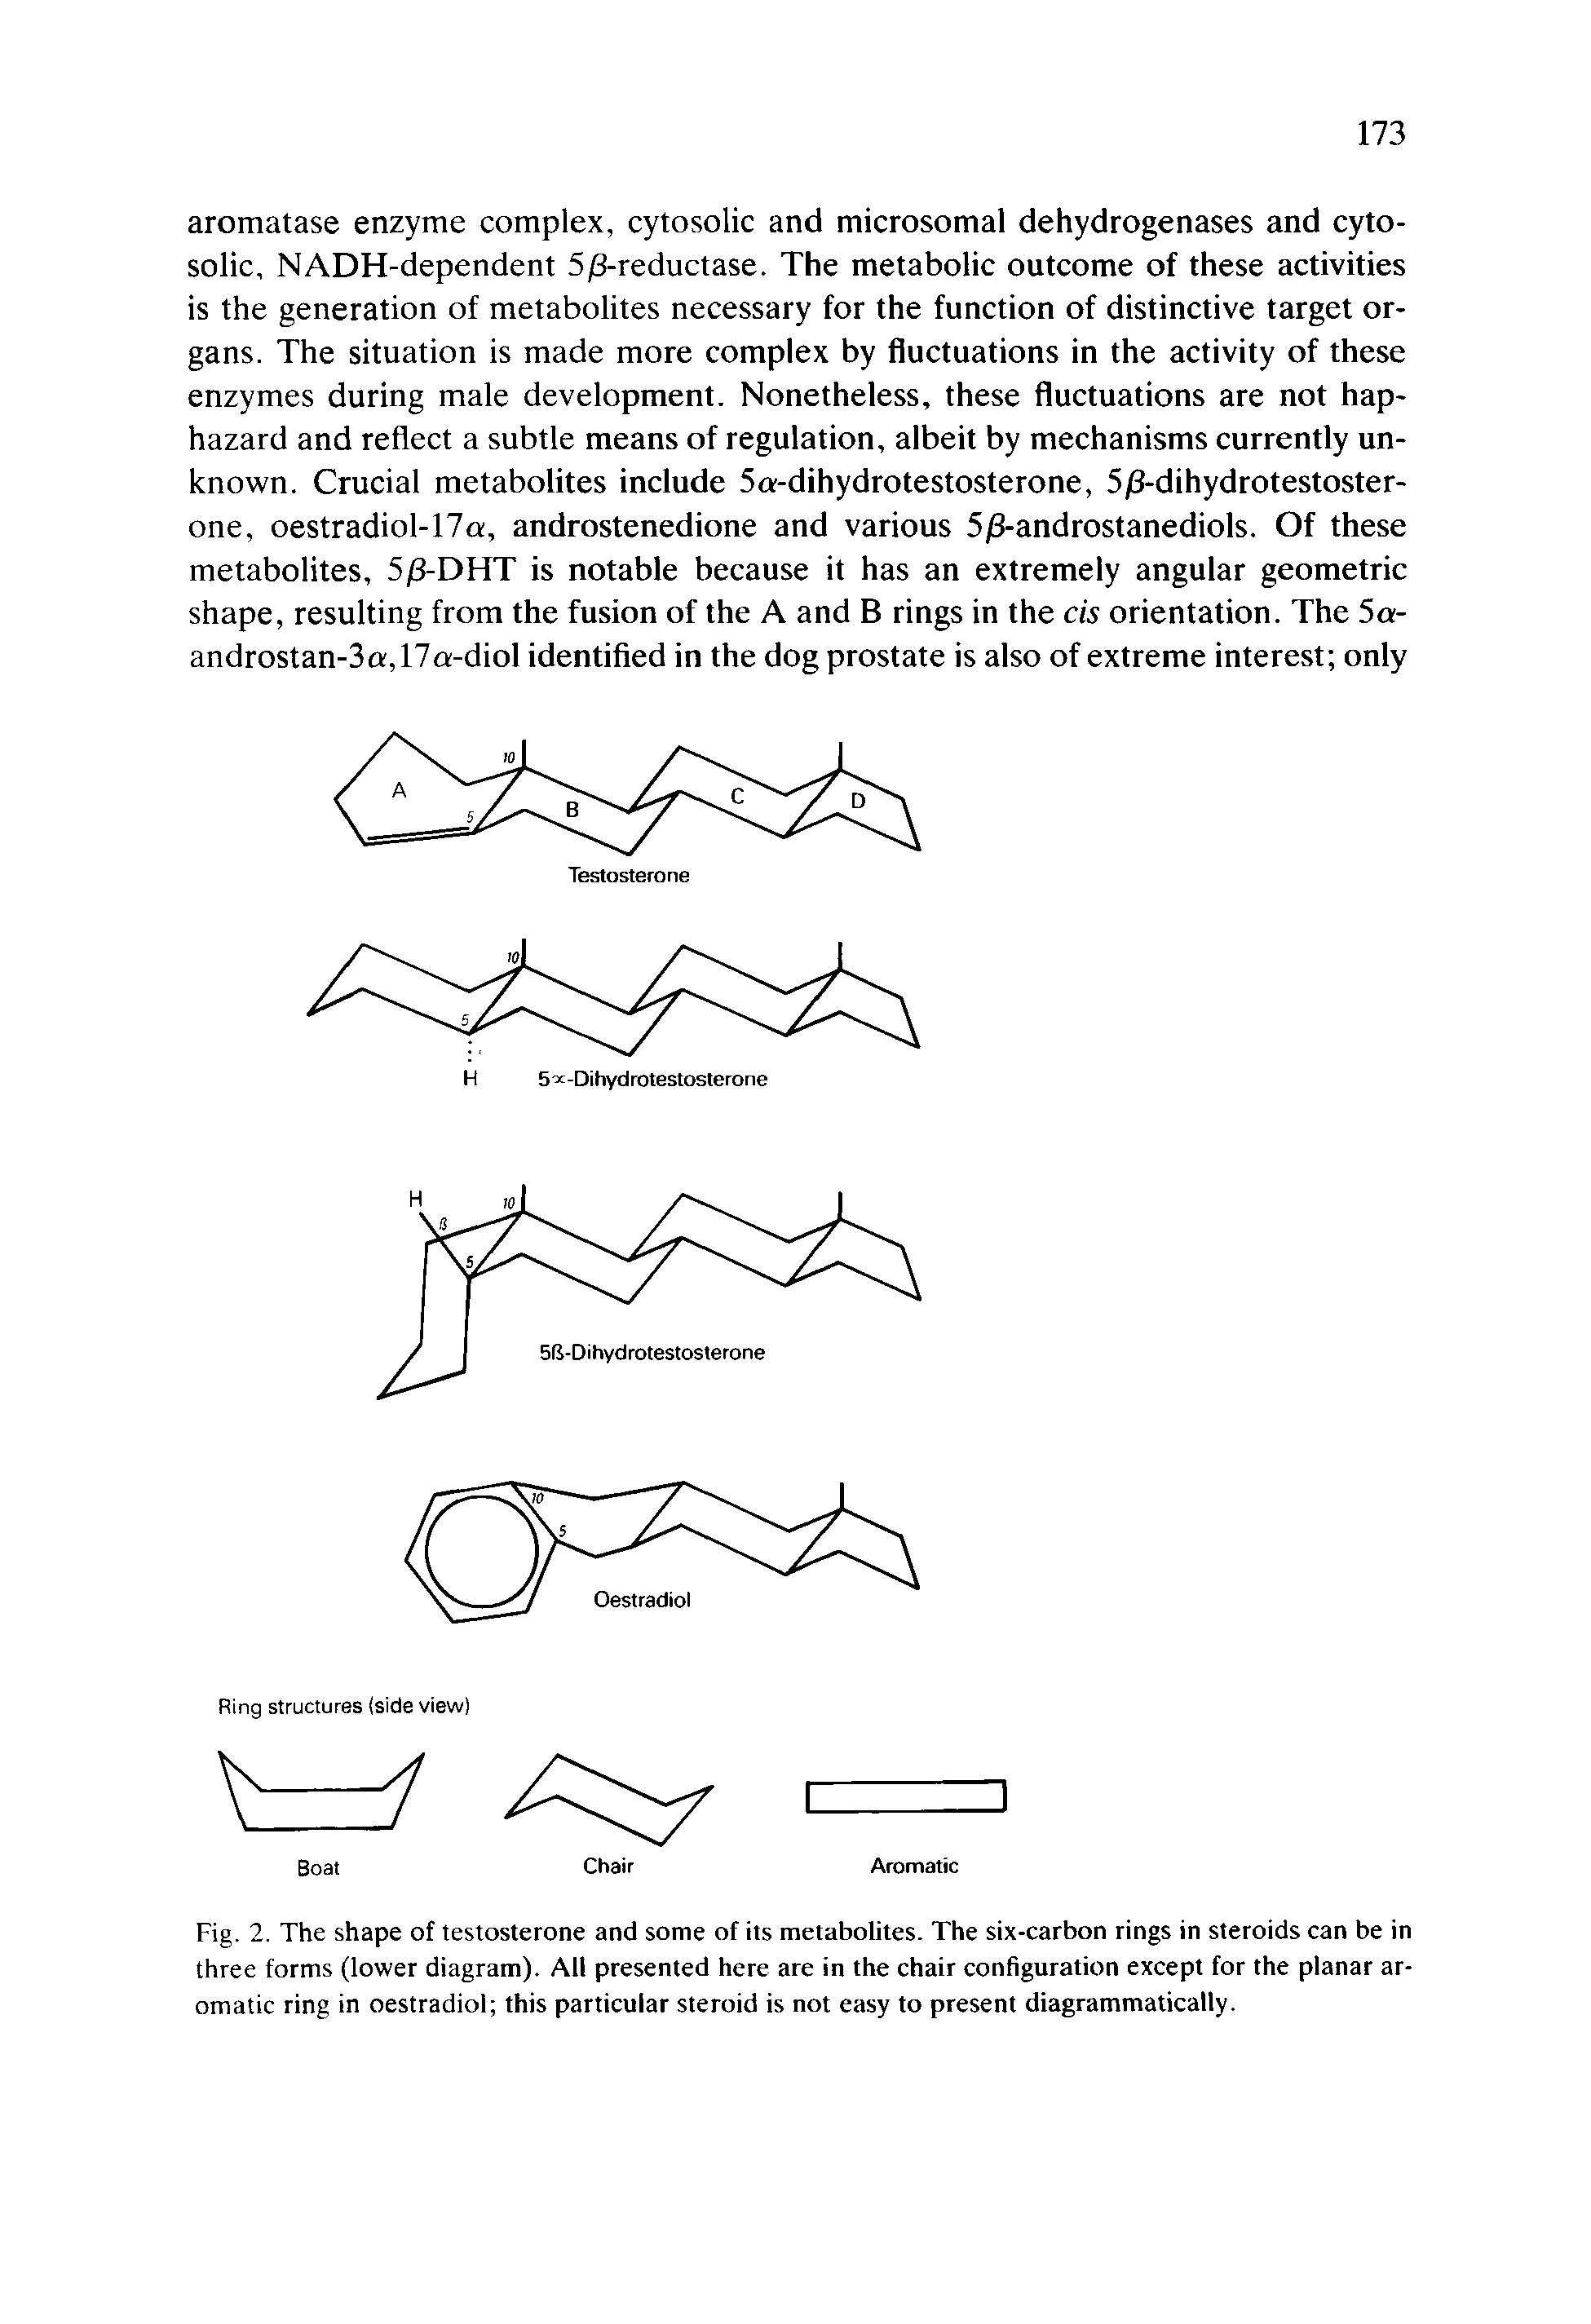 Fig. 2. The shape of testosterone and some of its metabolites. The six-carbon rings in steroids can be in three forms (lower diagram). All presented here are in the chair configuration except for the planar aromatic ring in oestradiol this particular steroid is not easy to present diagrammatically.